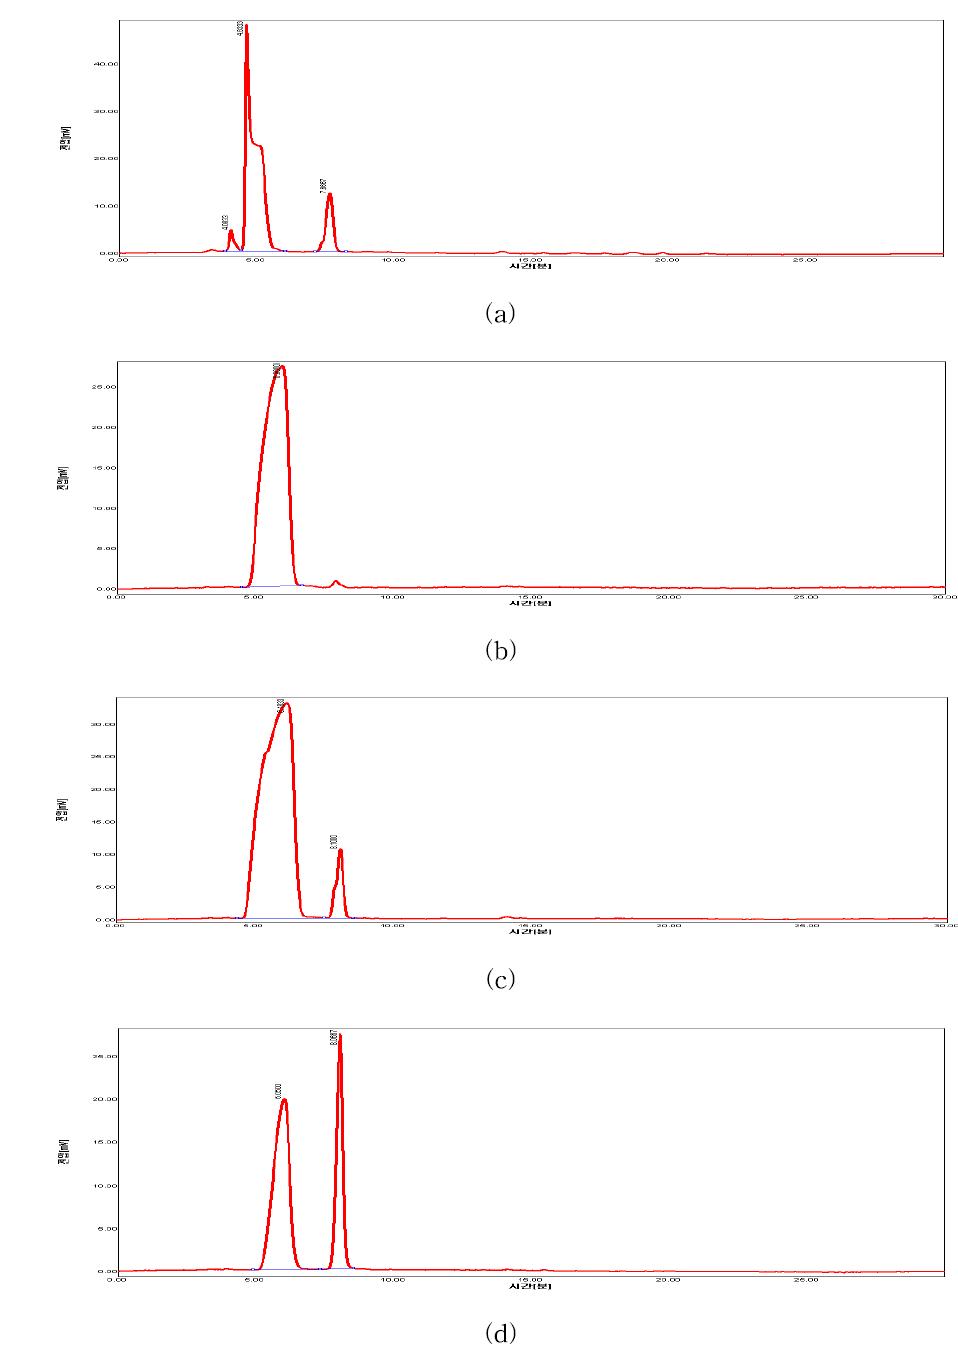 HPLC chromatogram of red betacyanin fractions 7(b), 8(c) and 9(d) of water extract from red beet pulp residue using a Sep-Pak Vac 35cc (10 g)water extract from red beet pulp residue using a Sep-Pak Vac 35cc (10 g)water extract from red beet pulp residue using a Sep-Pak Vac 35cc (10 g)water extract from red beet pulp residue using a Sep-Pak Vac 35cc (10 g) Waters Accell Plus QMA Cartridges